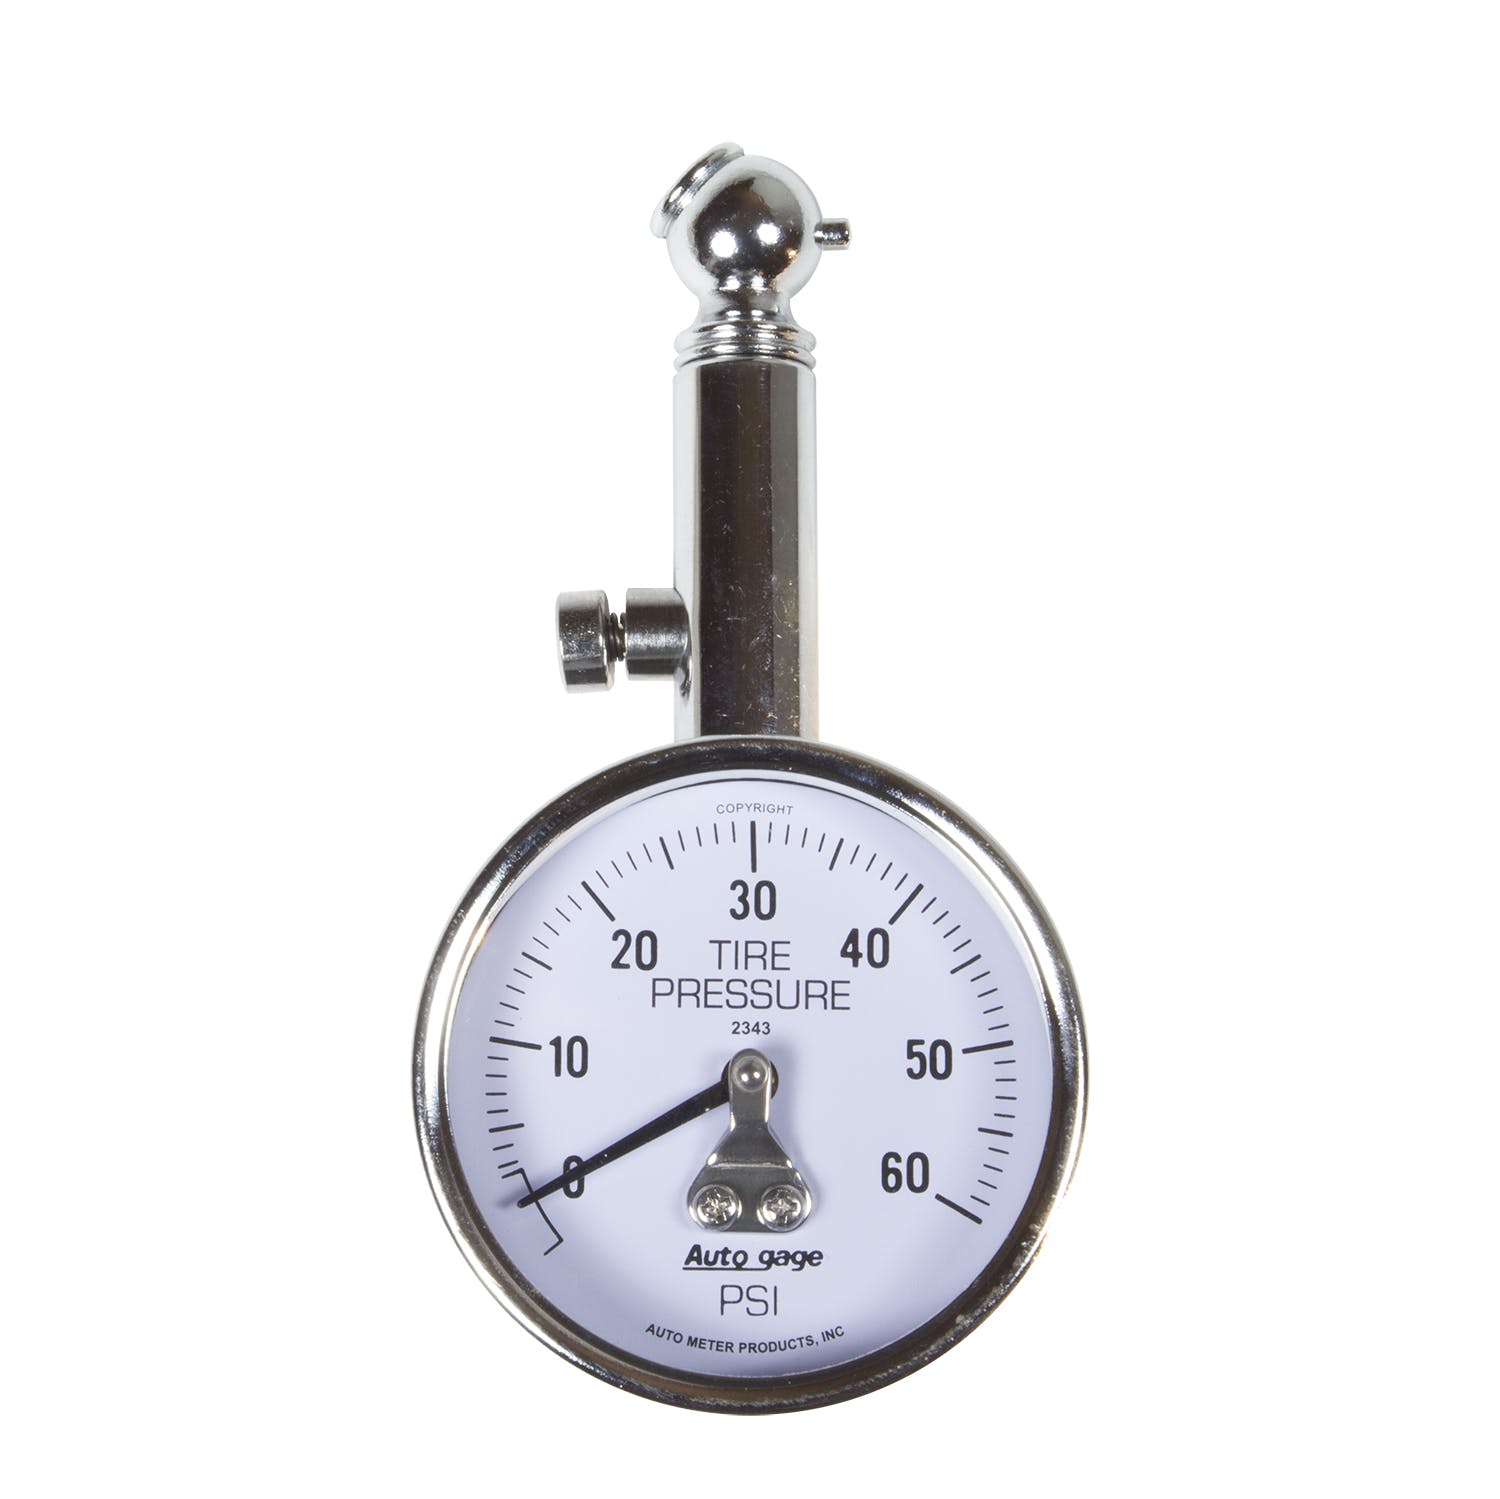 AutoMeter Products 2343 Tire Pressure Gauge 60 PSI